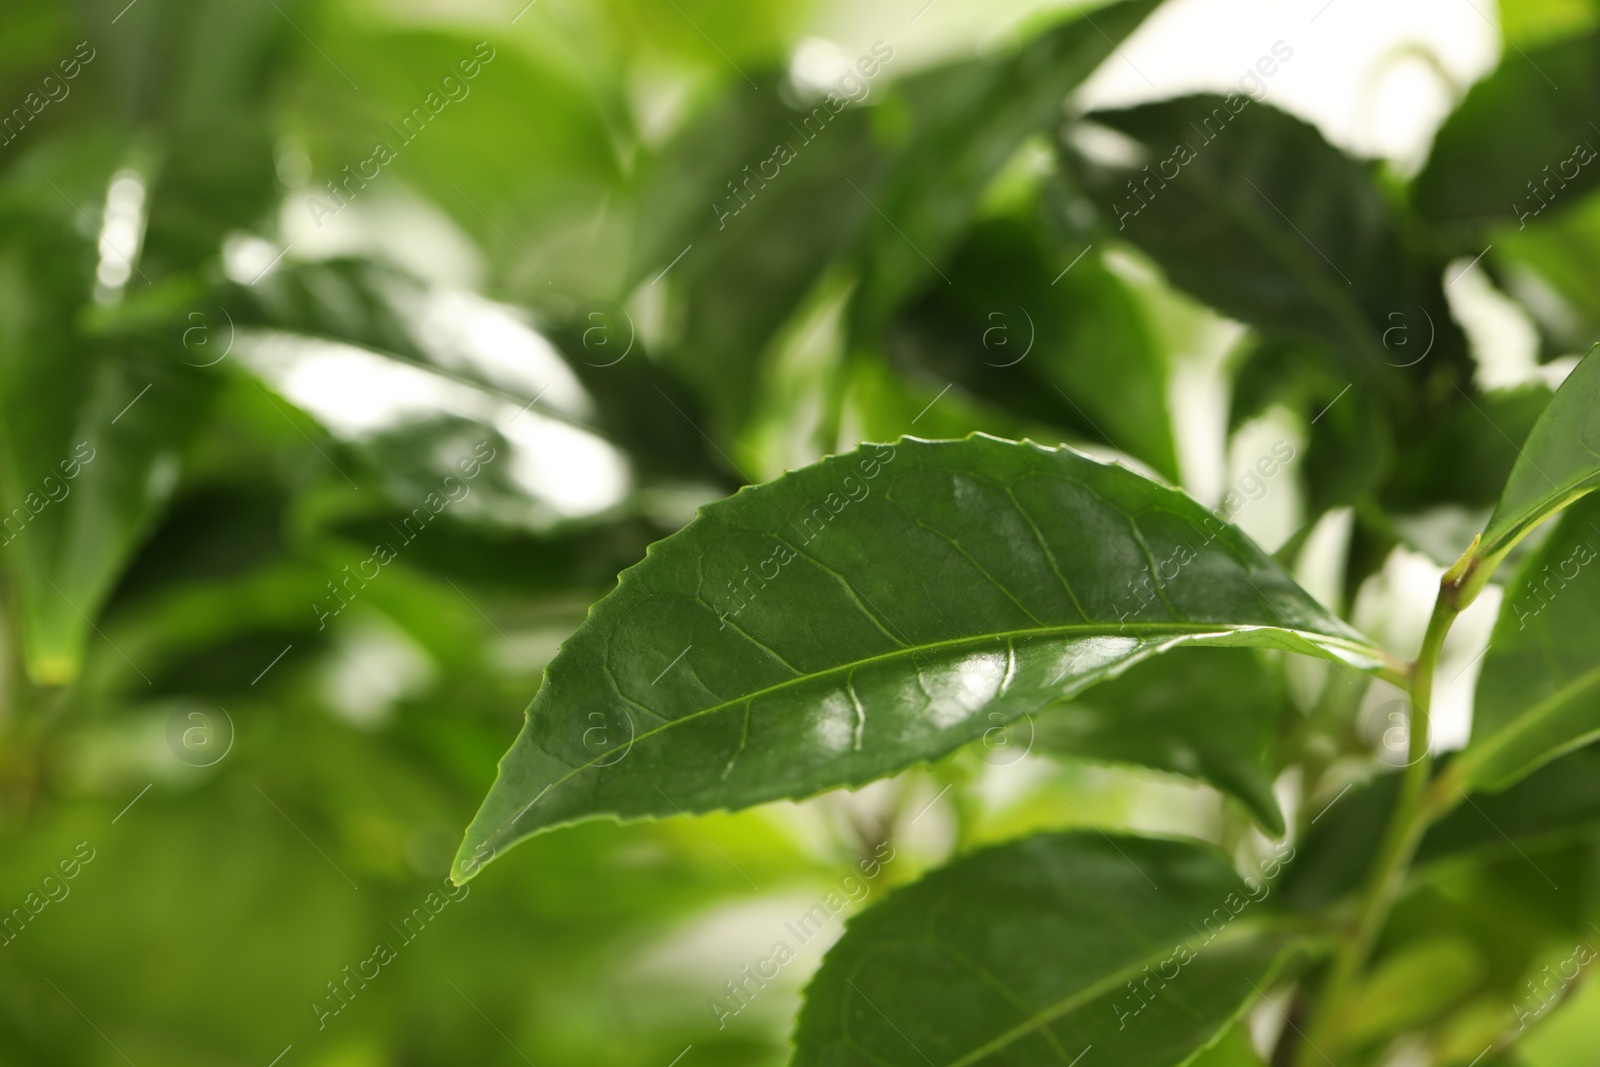 Photo of Closeup view of green tea plant against blurred background